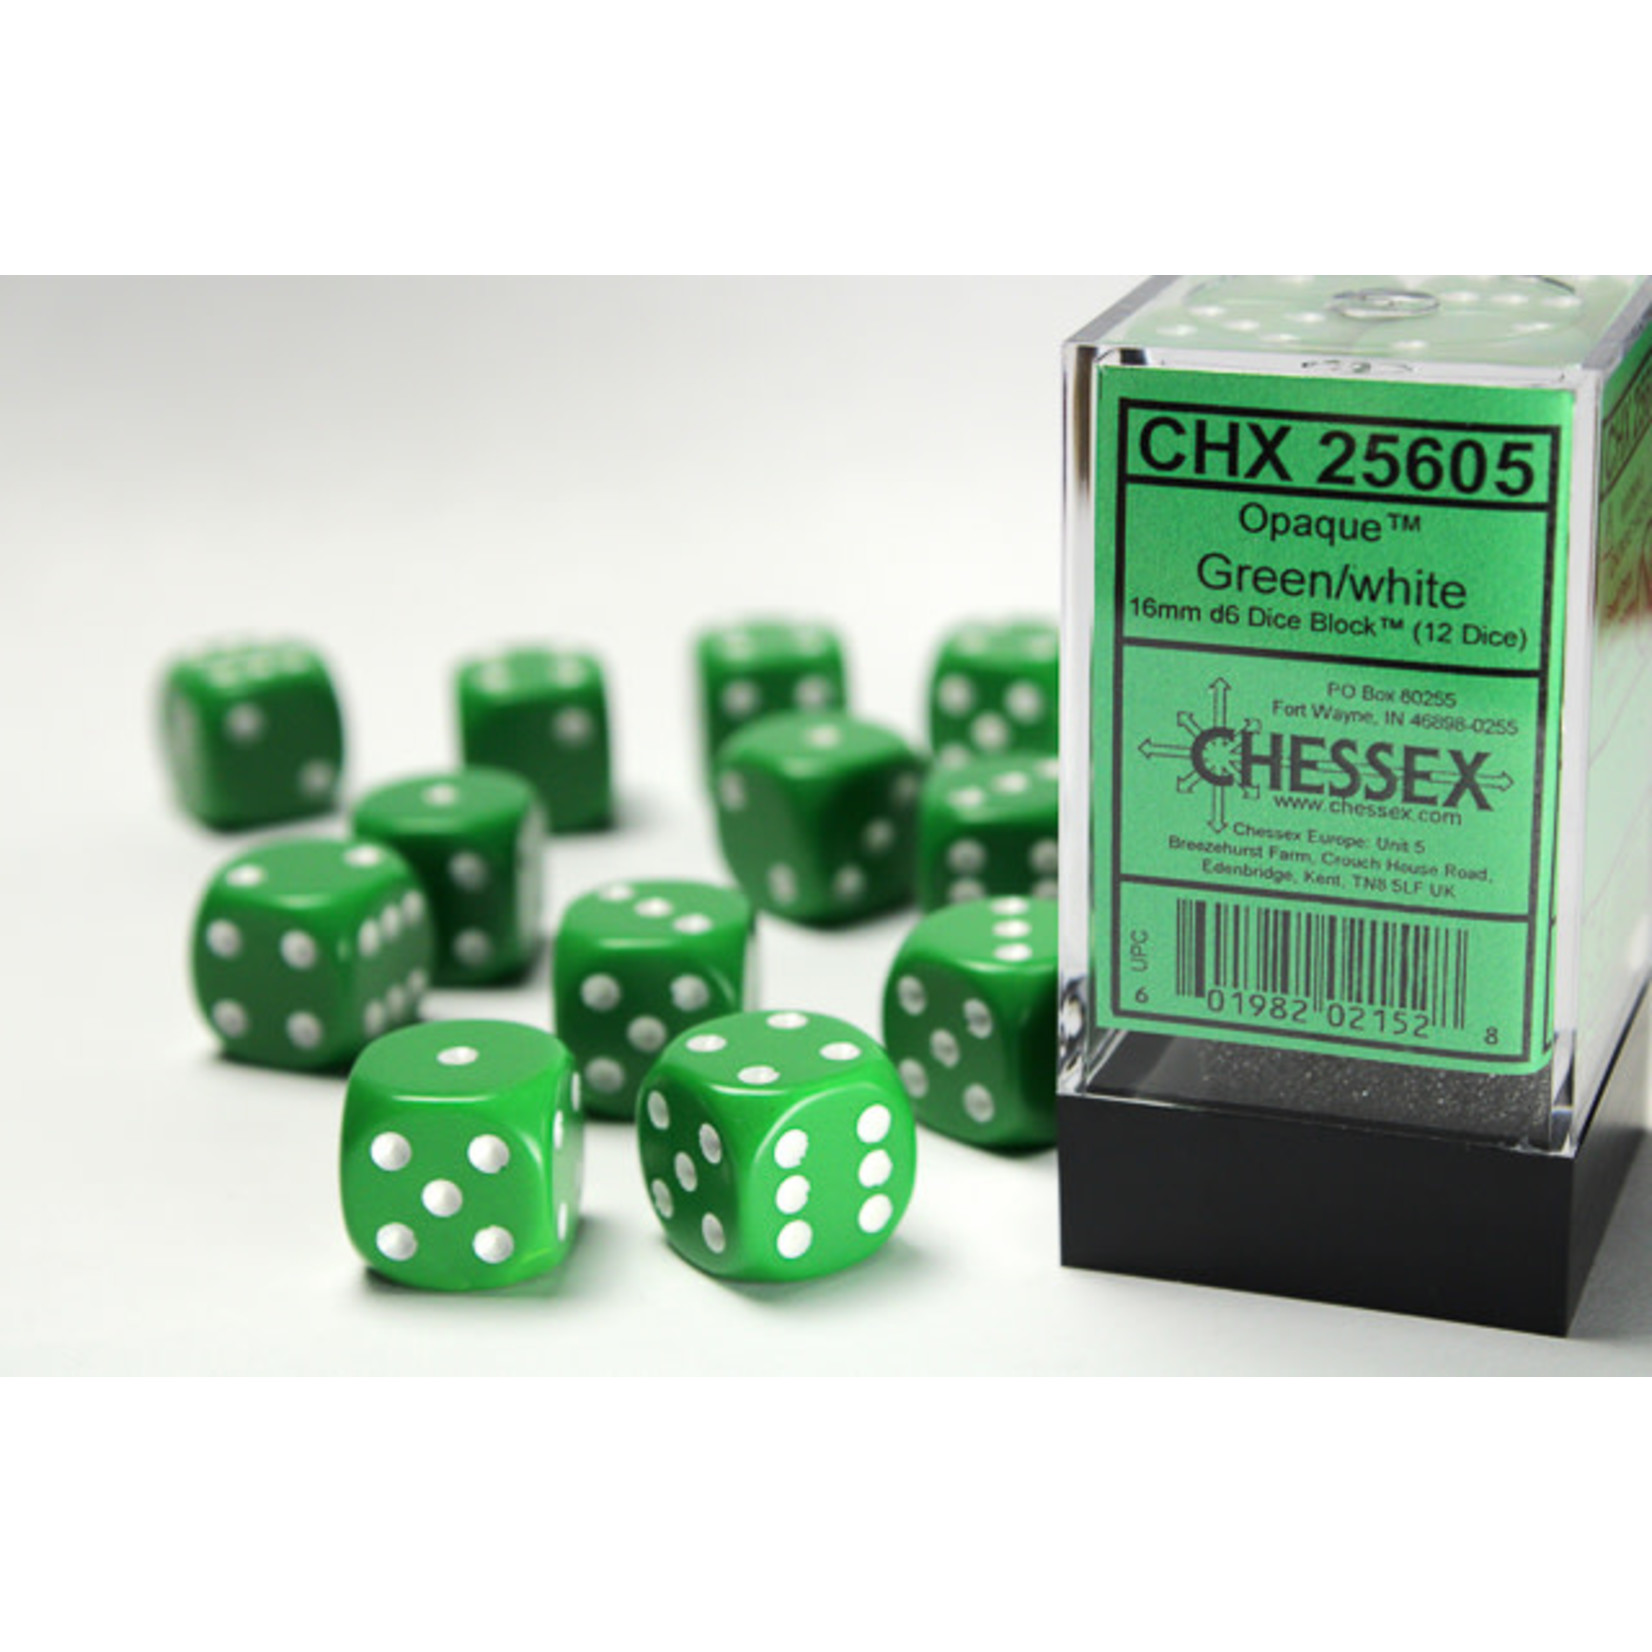 Chessex Dice 16mm 25605 12pc Opaque Green/White